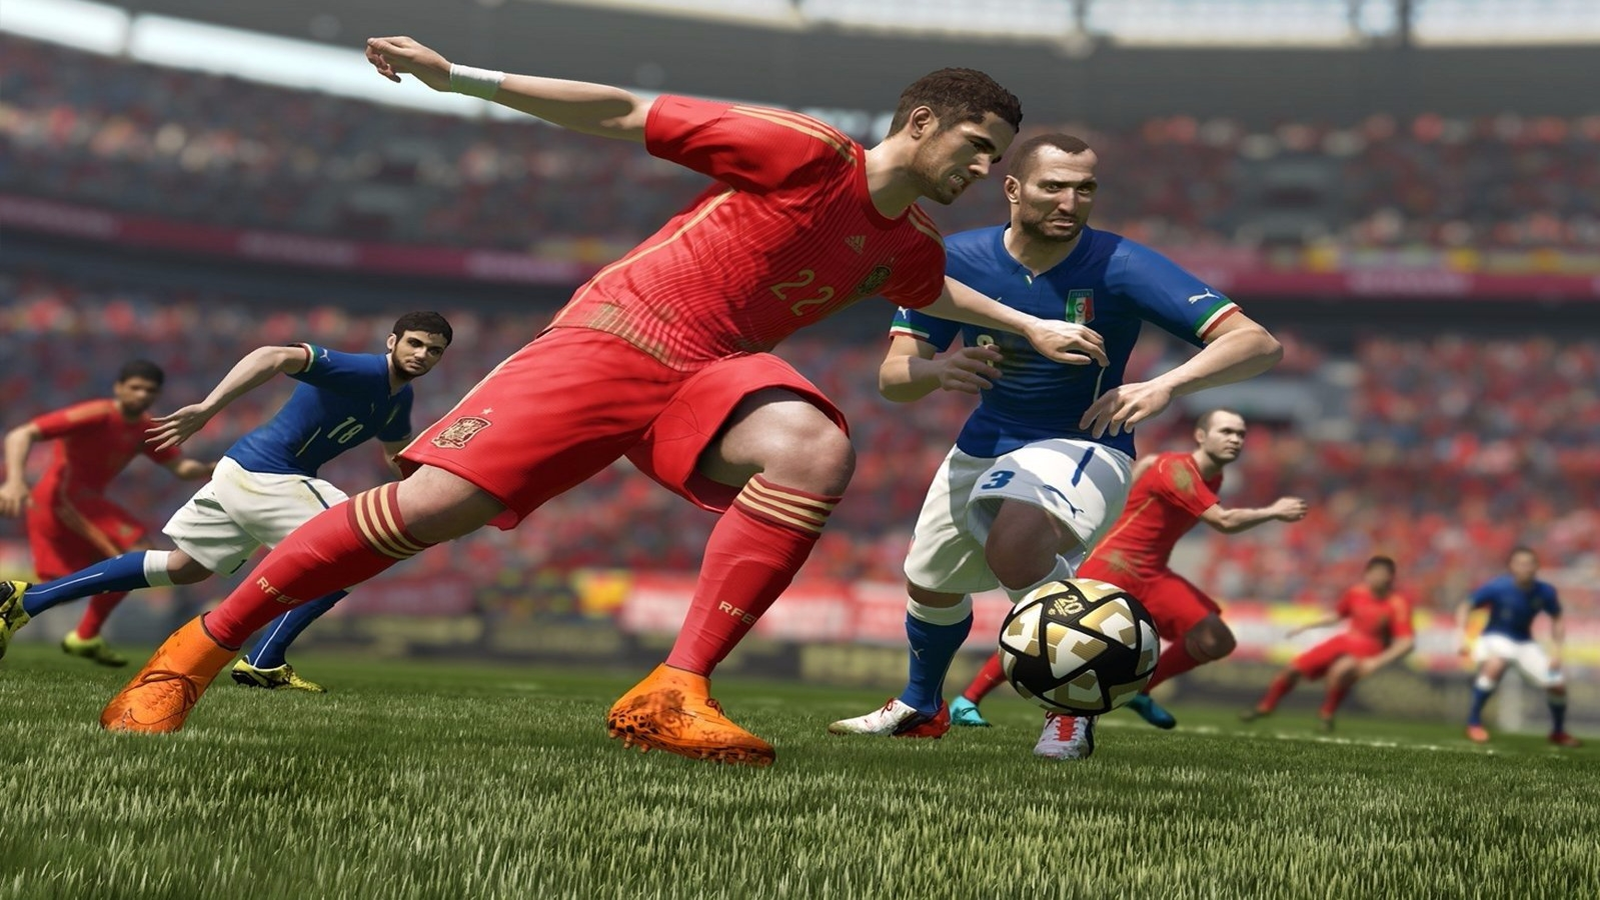 FIFA 18 Soccer PC Download Game Key Code Windows Computer